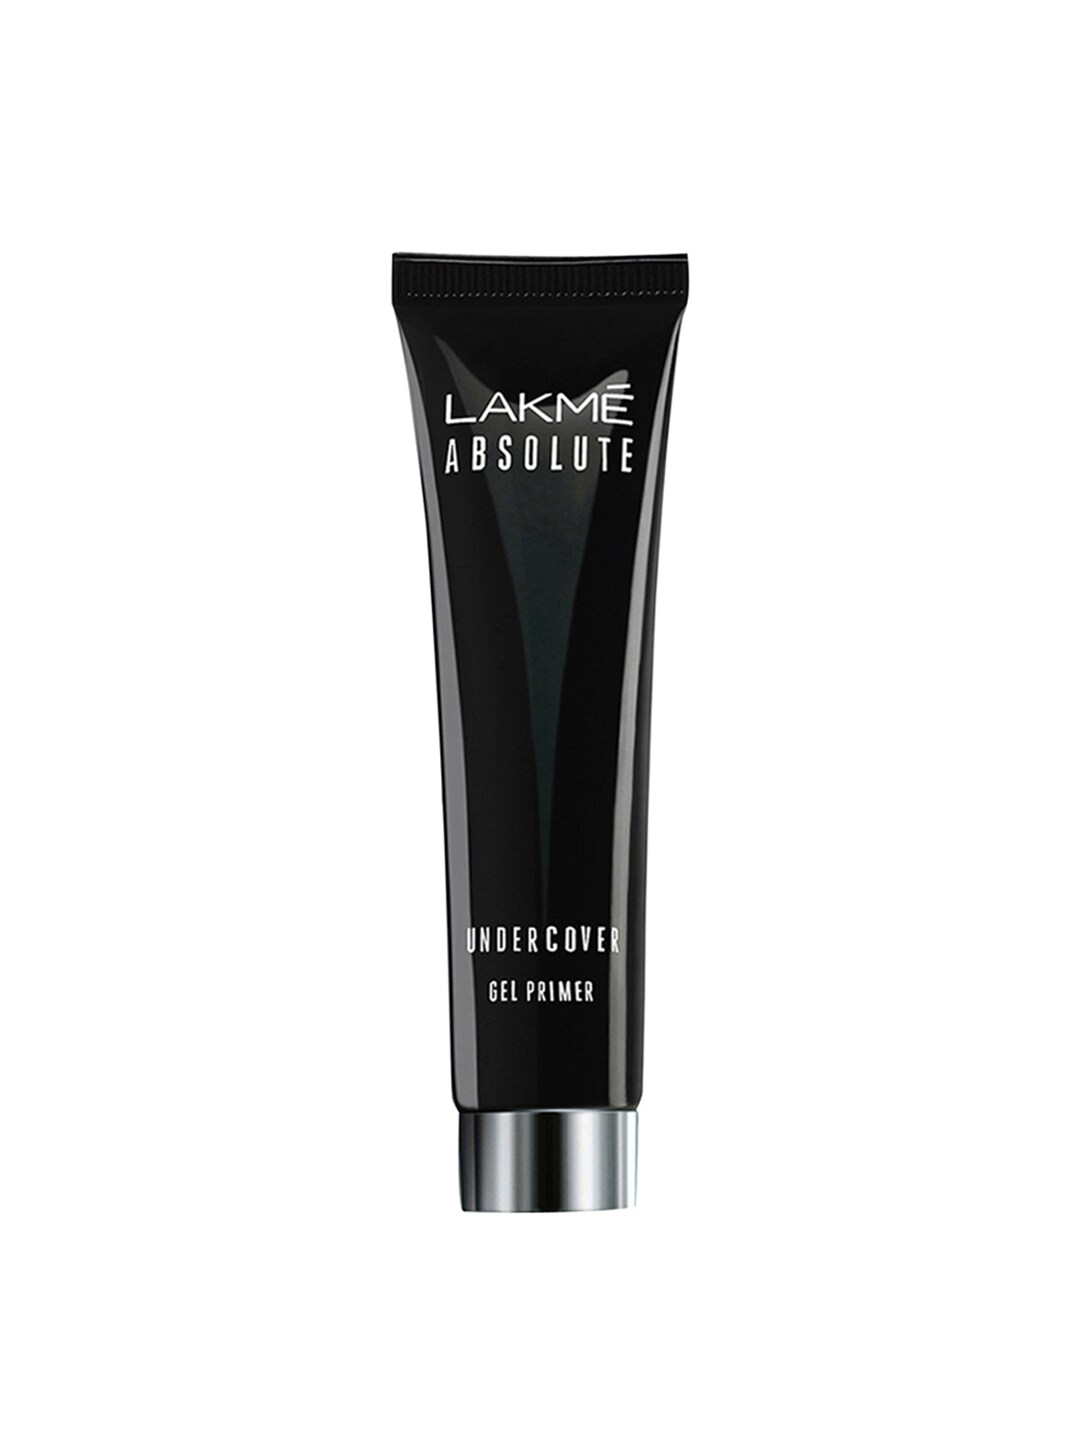 Lakme Absolute Under Cover Gel Face Primer 30g Price in India